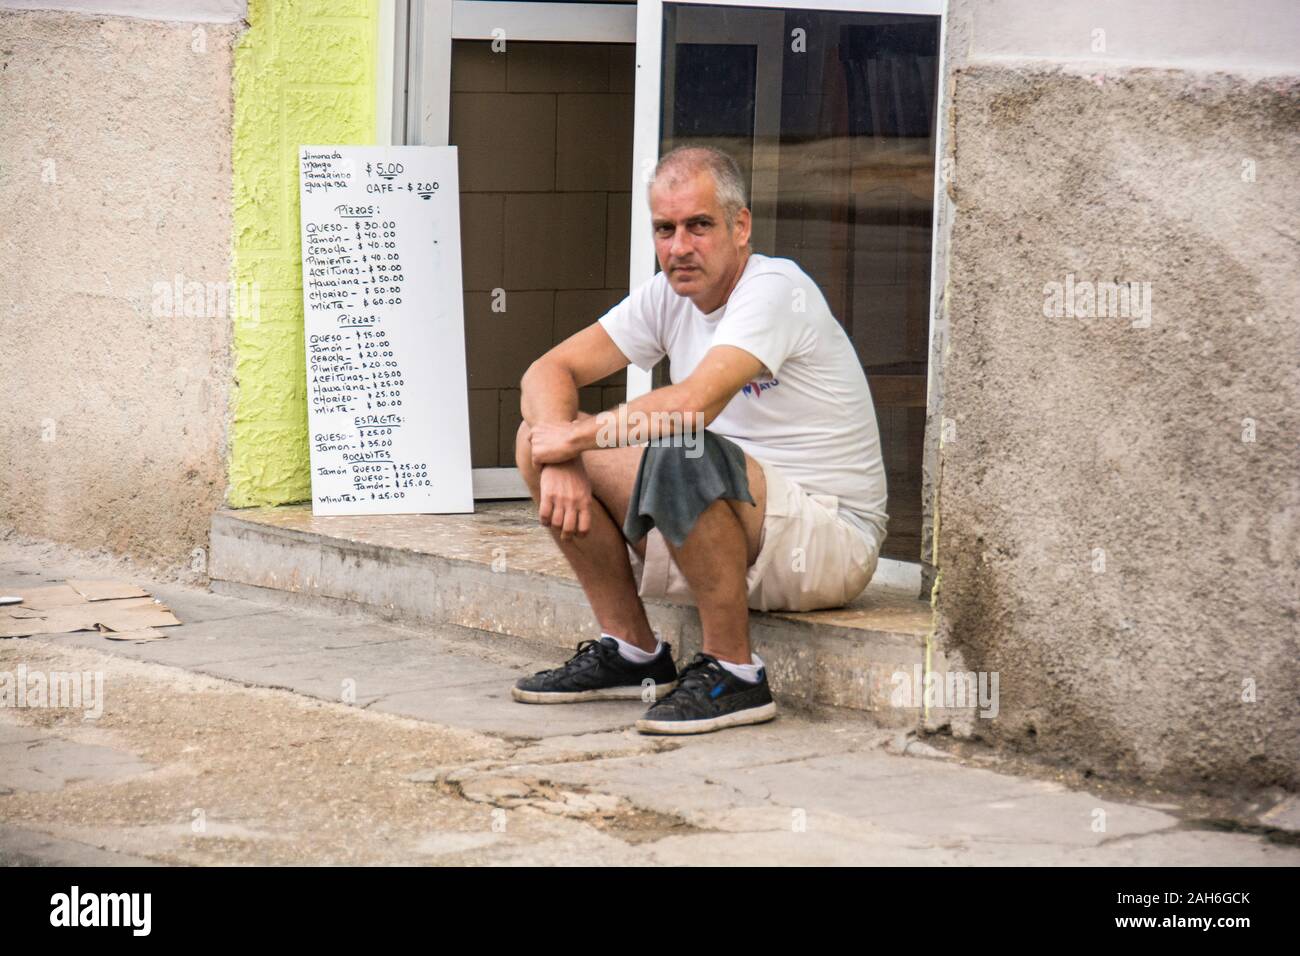 People of Havana Series - A man sitting in front of a restaurant waiting for customers. Stock Photo